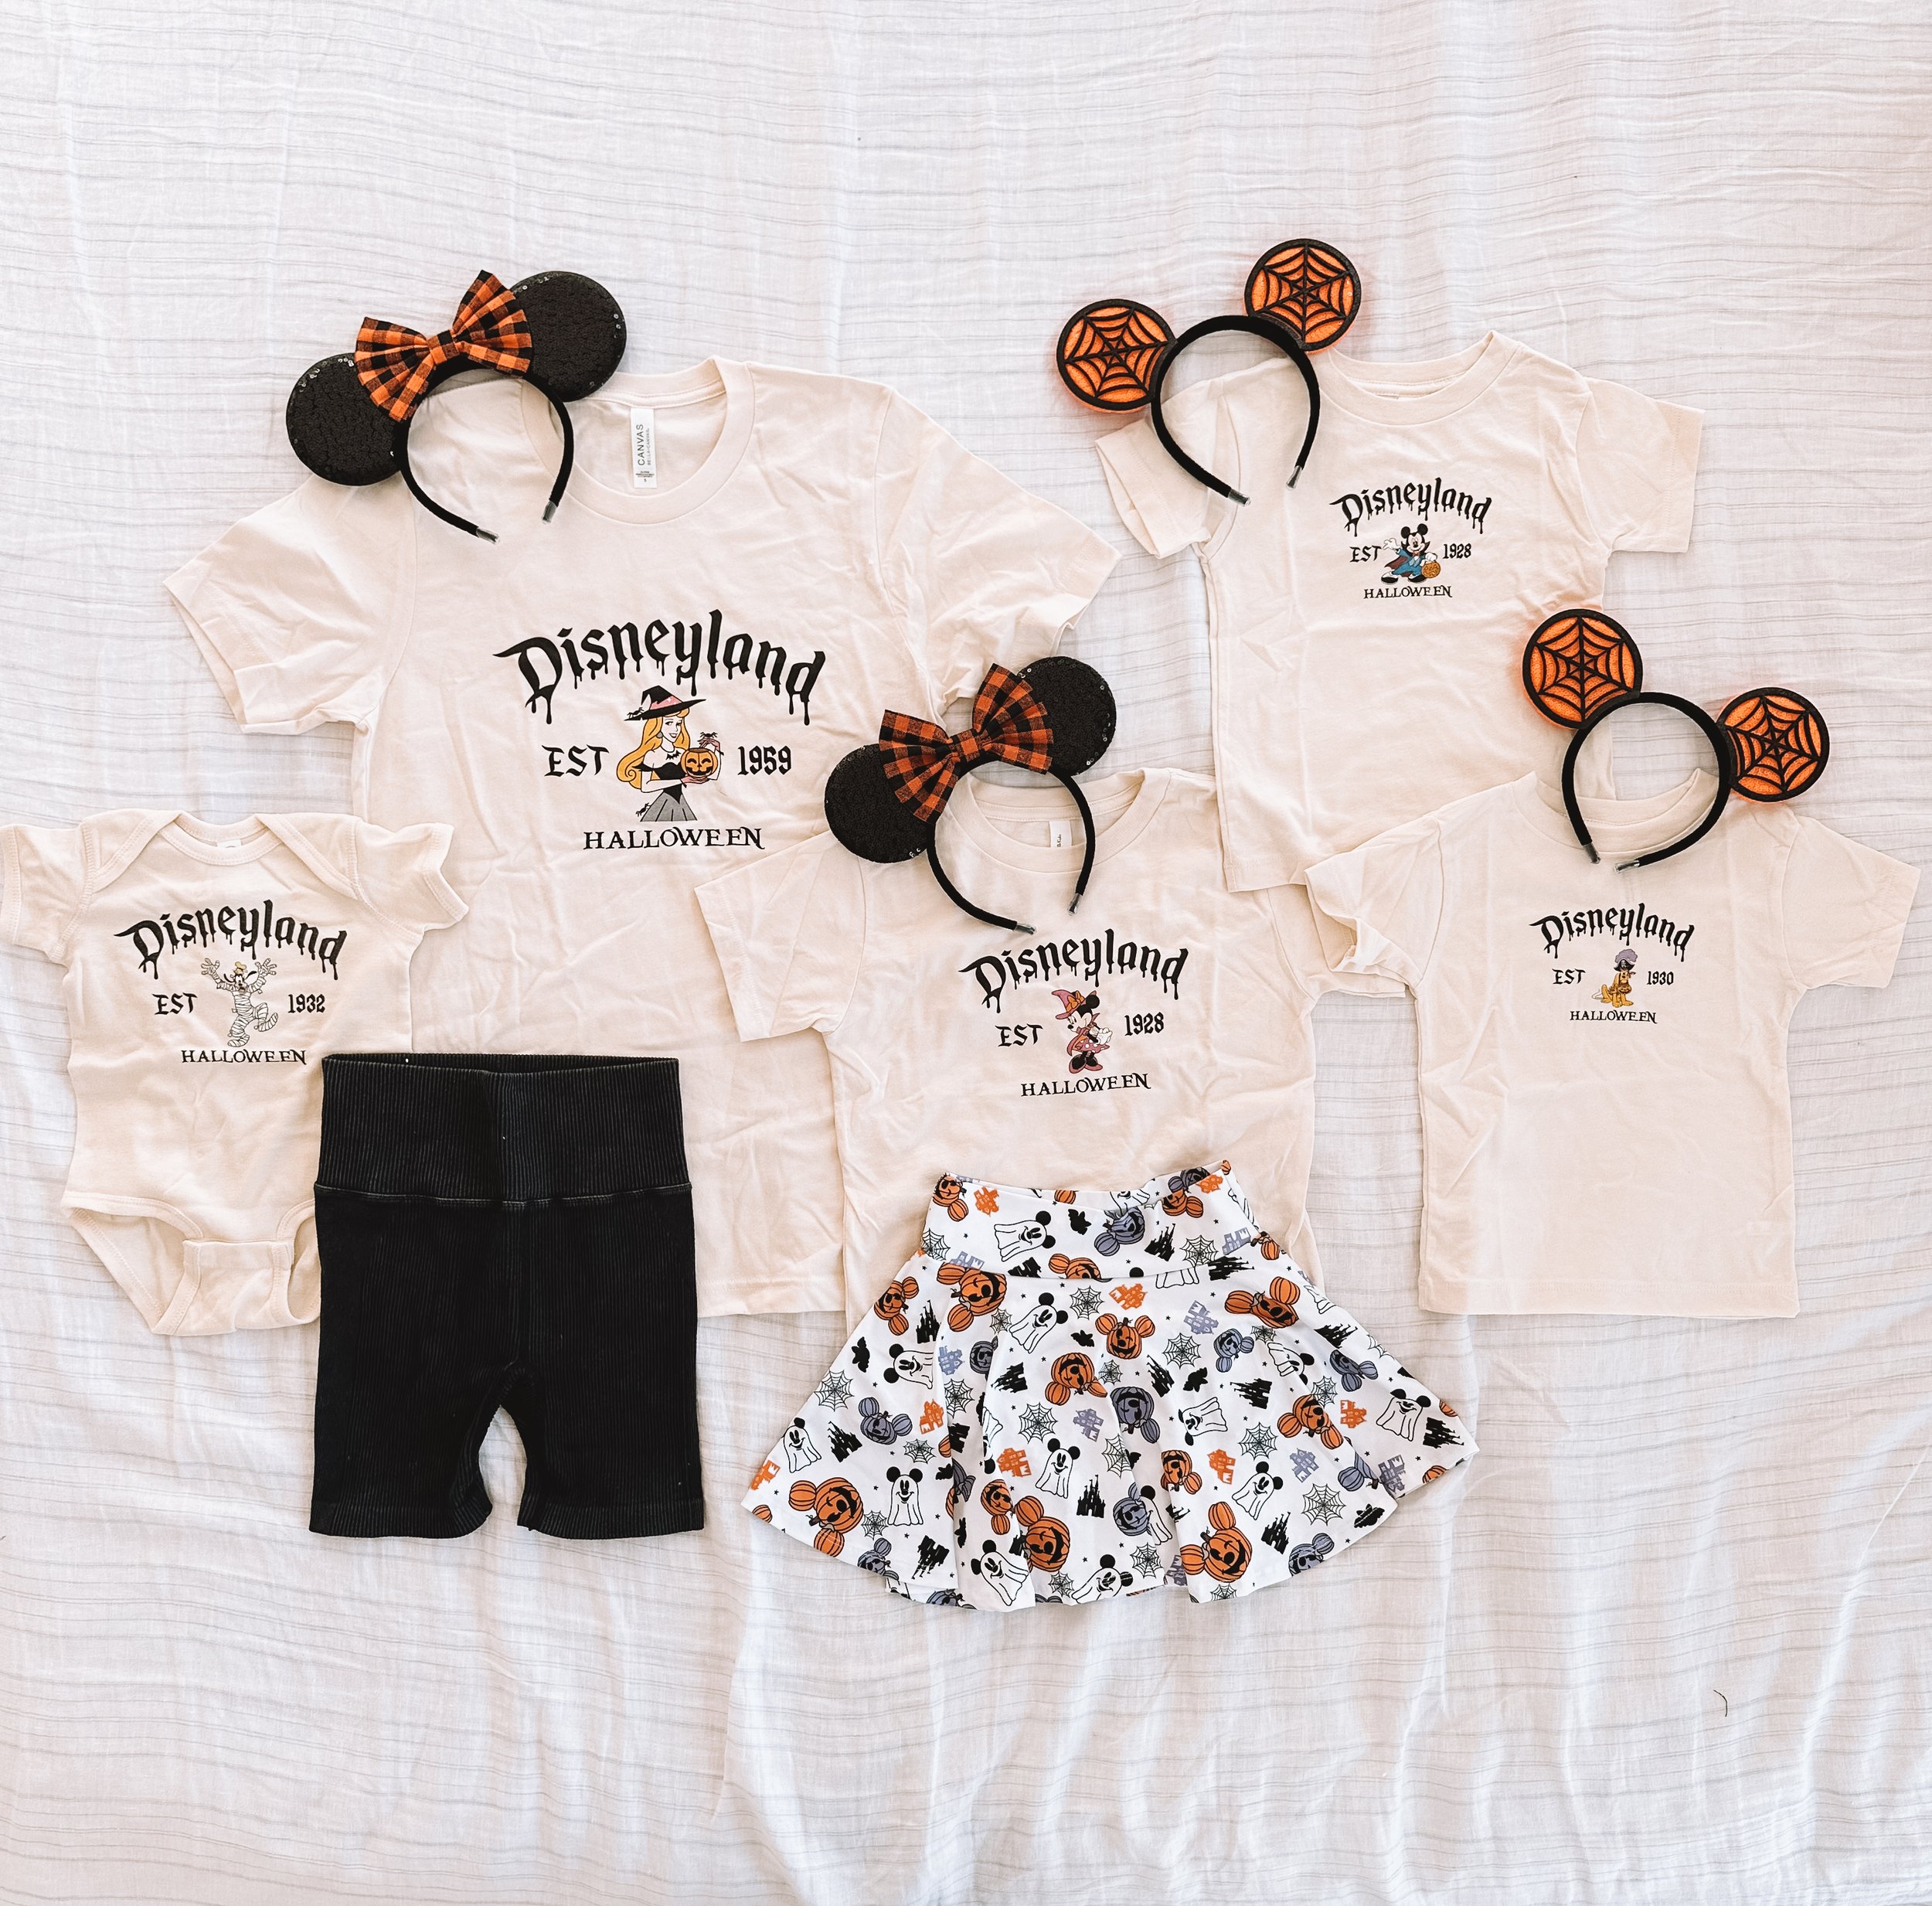 Family Disneyland Outfits at Halloween — The Overwhelmed Mommy Blog